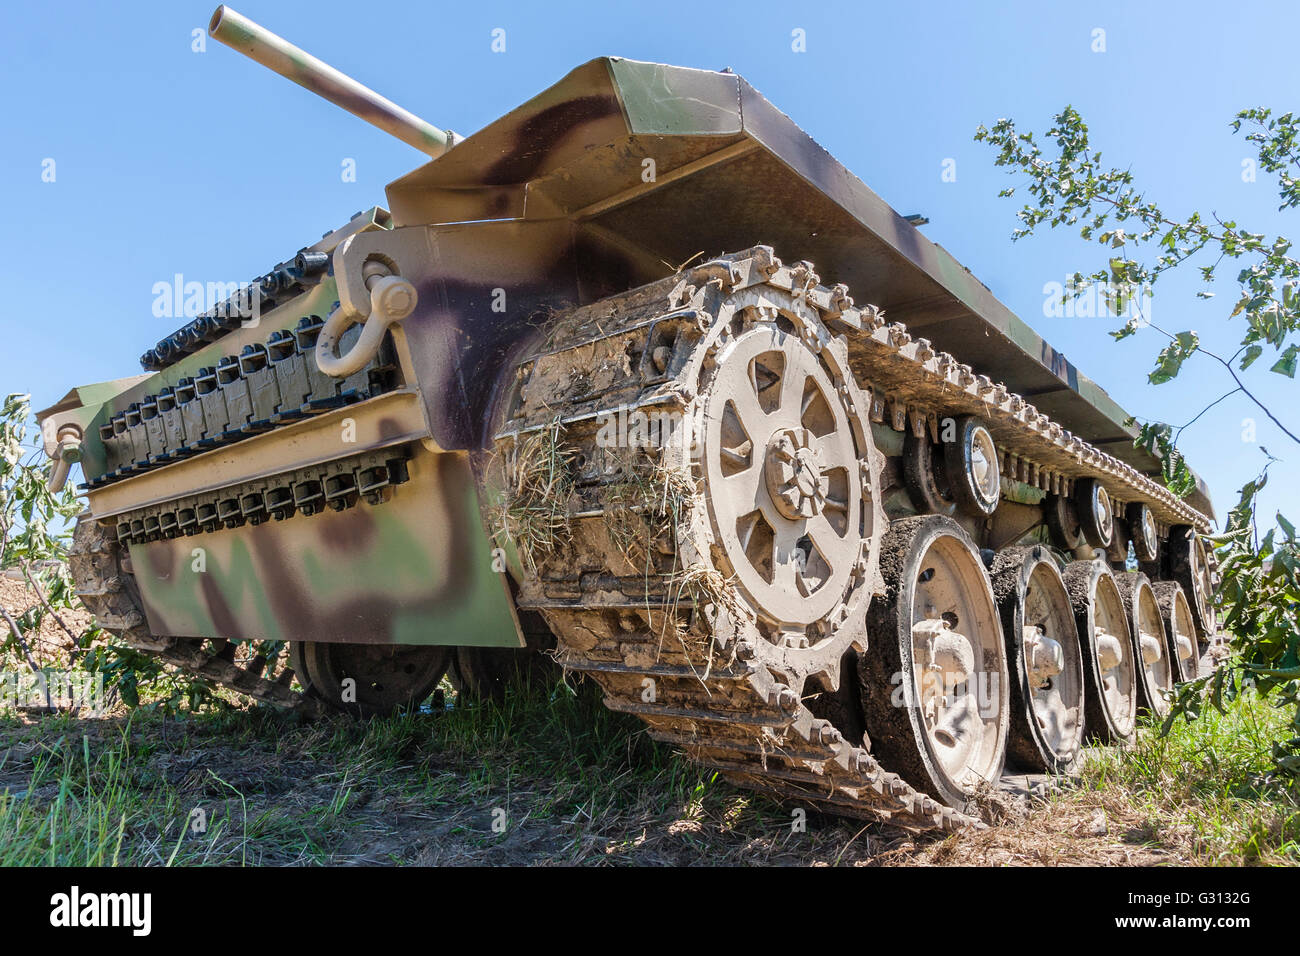 World War Two living history. German tank, Panzer IV, close up wide angle shot from front side below tracks, tank towering over viewer, blue sky above. Stock Photo